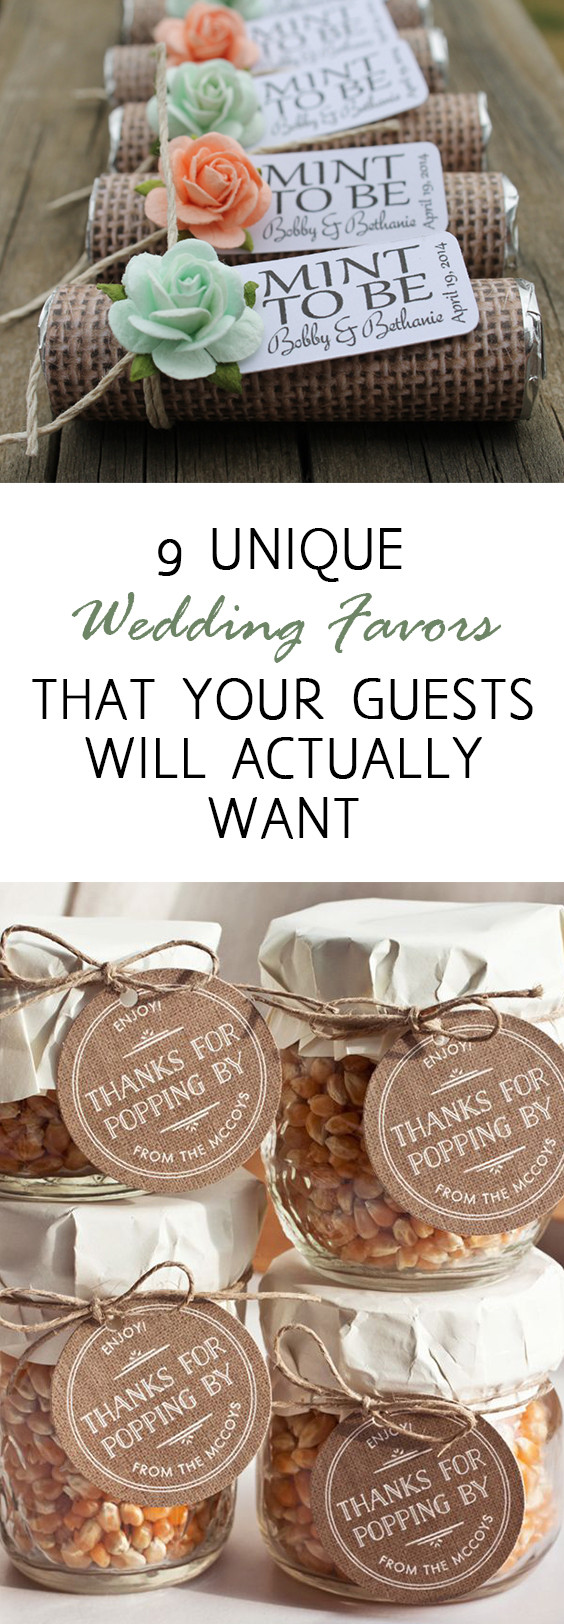 Ideas For Wedding Favors
 9 Unique Wedding Favors that Your Guests Will Actually